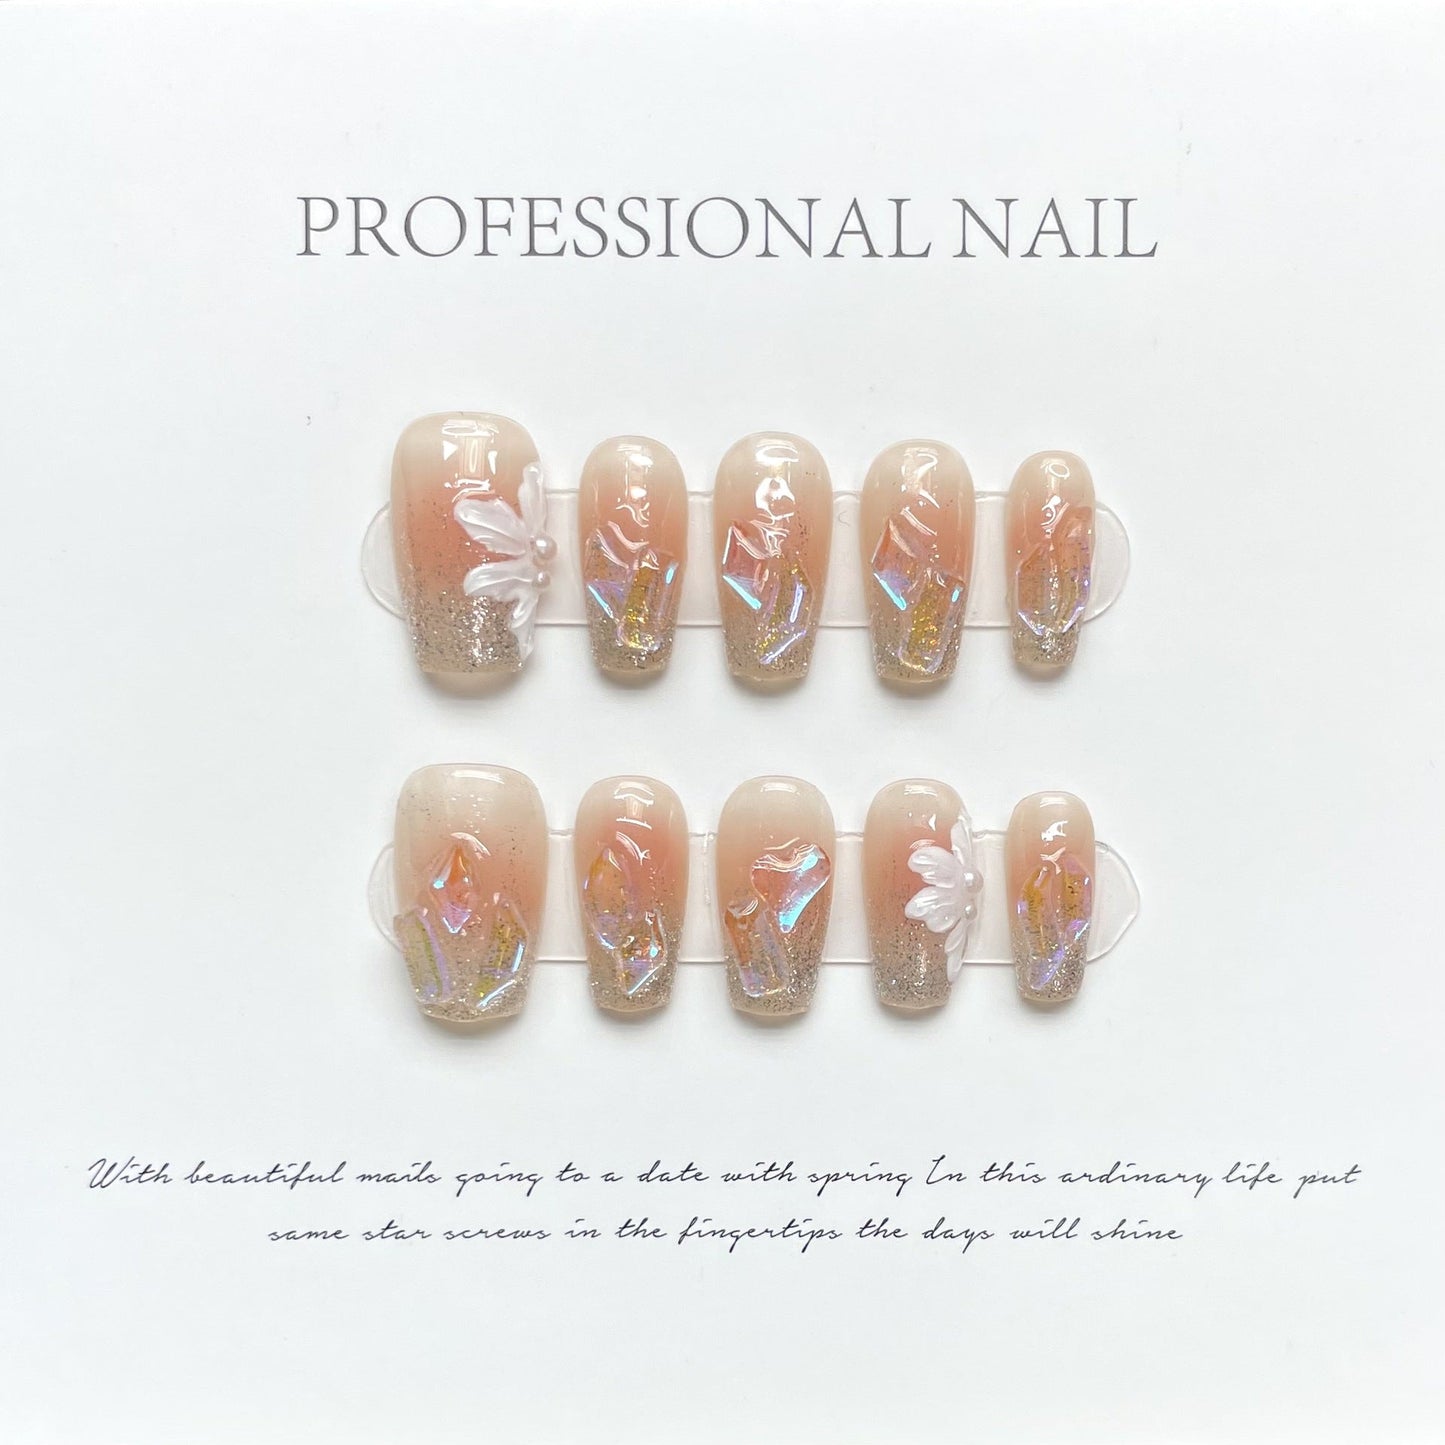 1030/1035 Flowers style press on nails 100% handmade false nails pink nude color